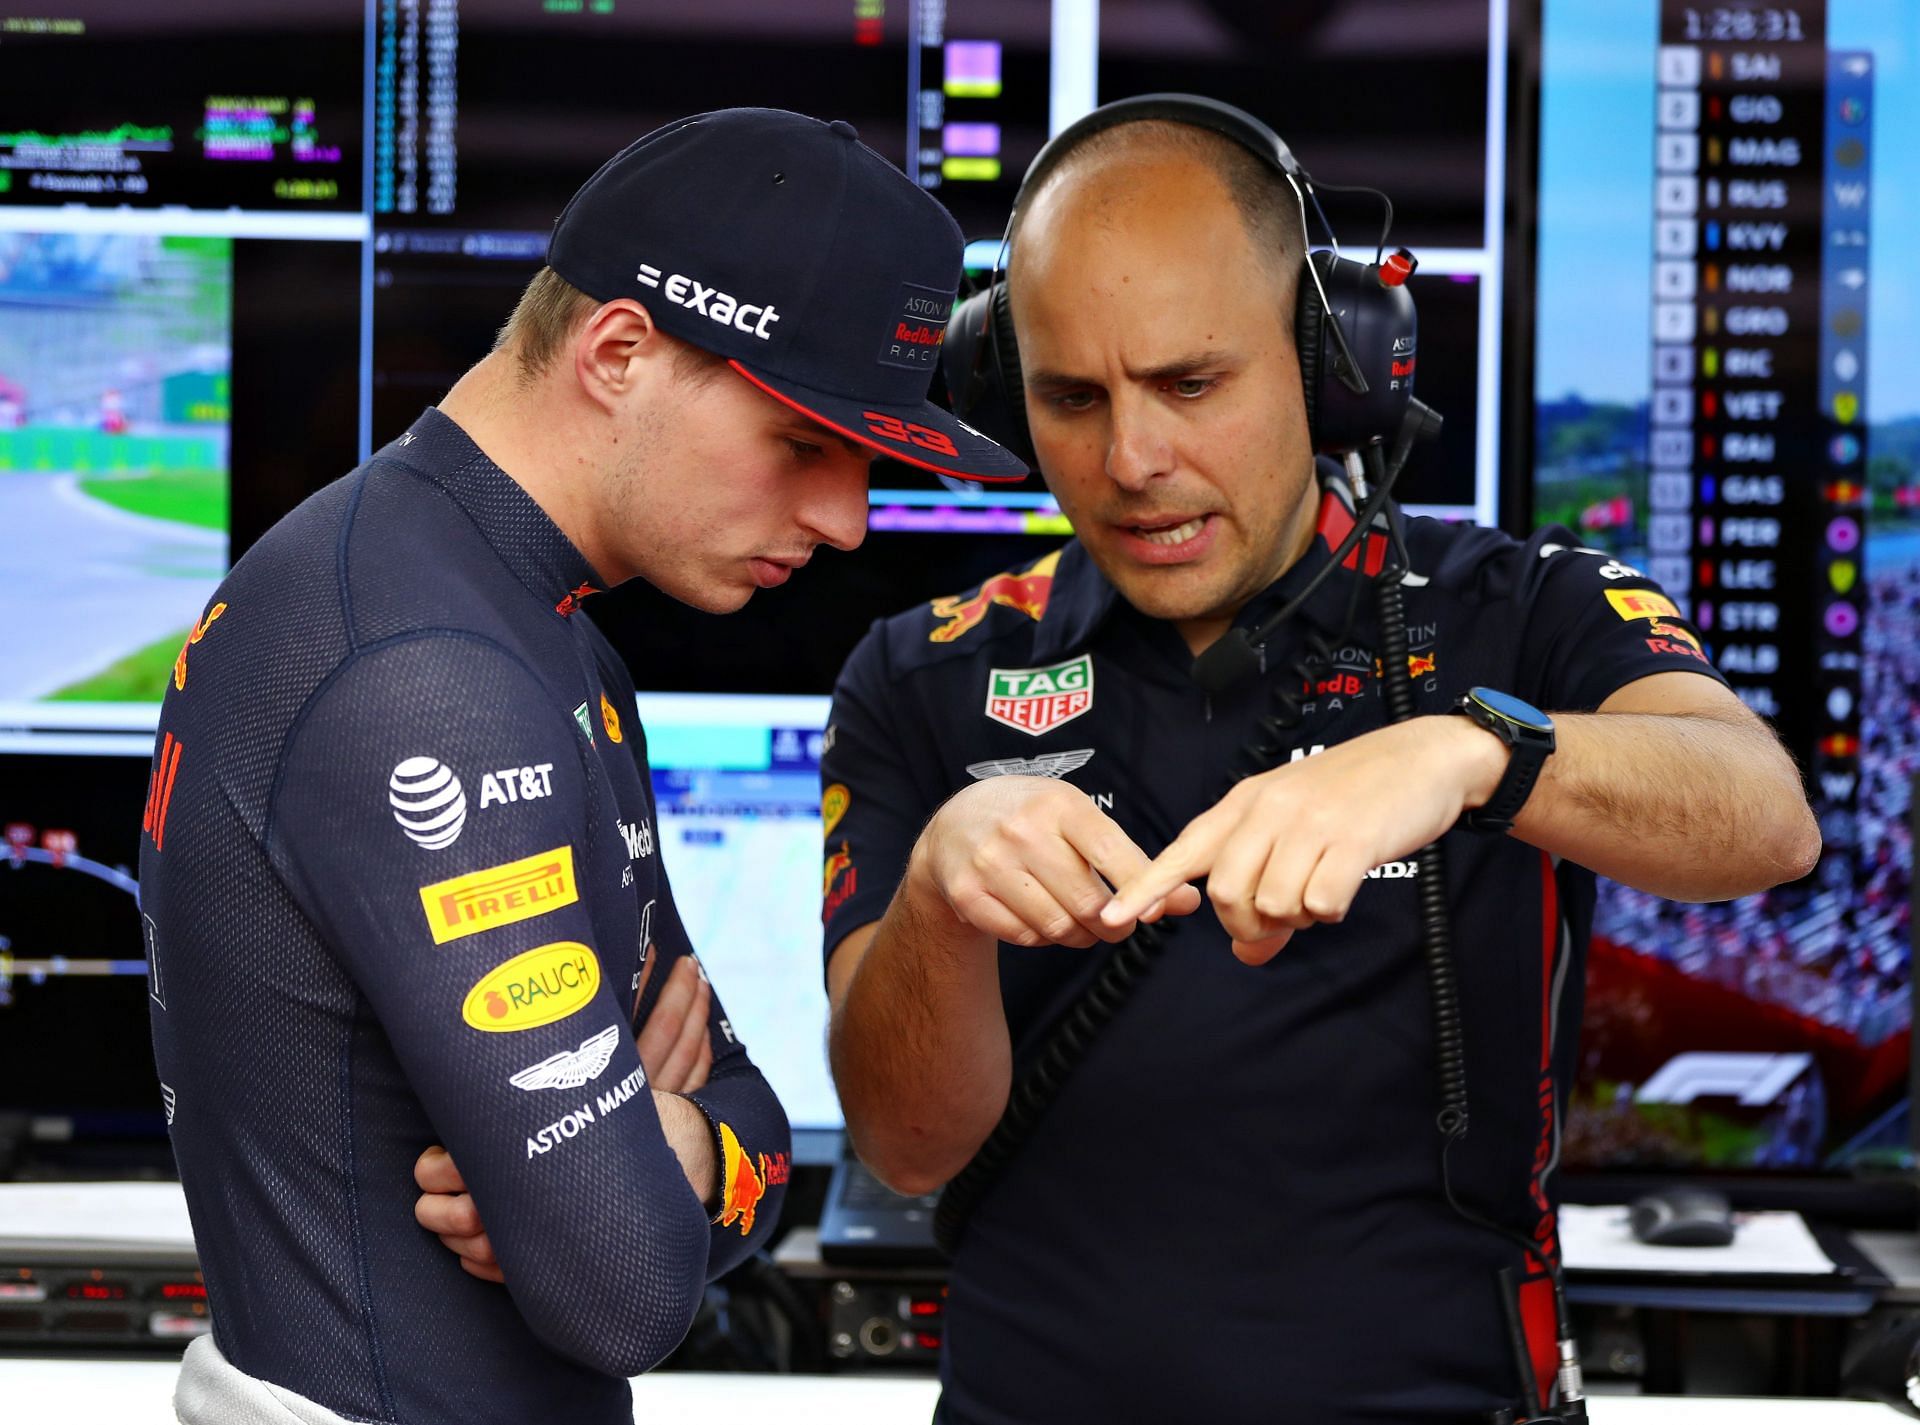 F1 Grand Prix of Canada - Practice - Max Verstappen with Gianpiero Lambiase in the Red Bull garage (Photo by Mark Thompson/Getty Images)